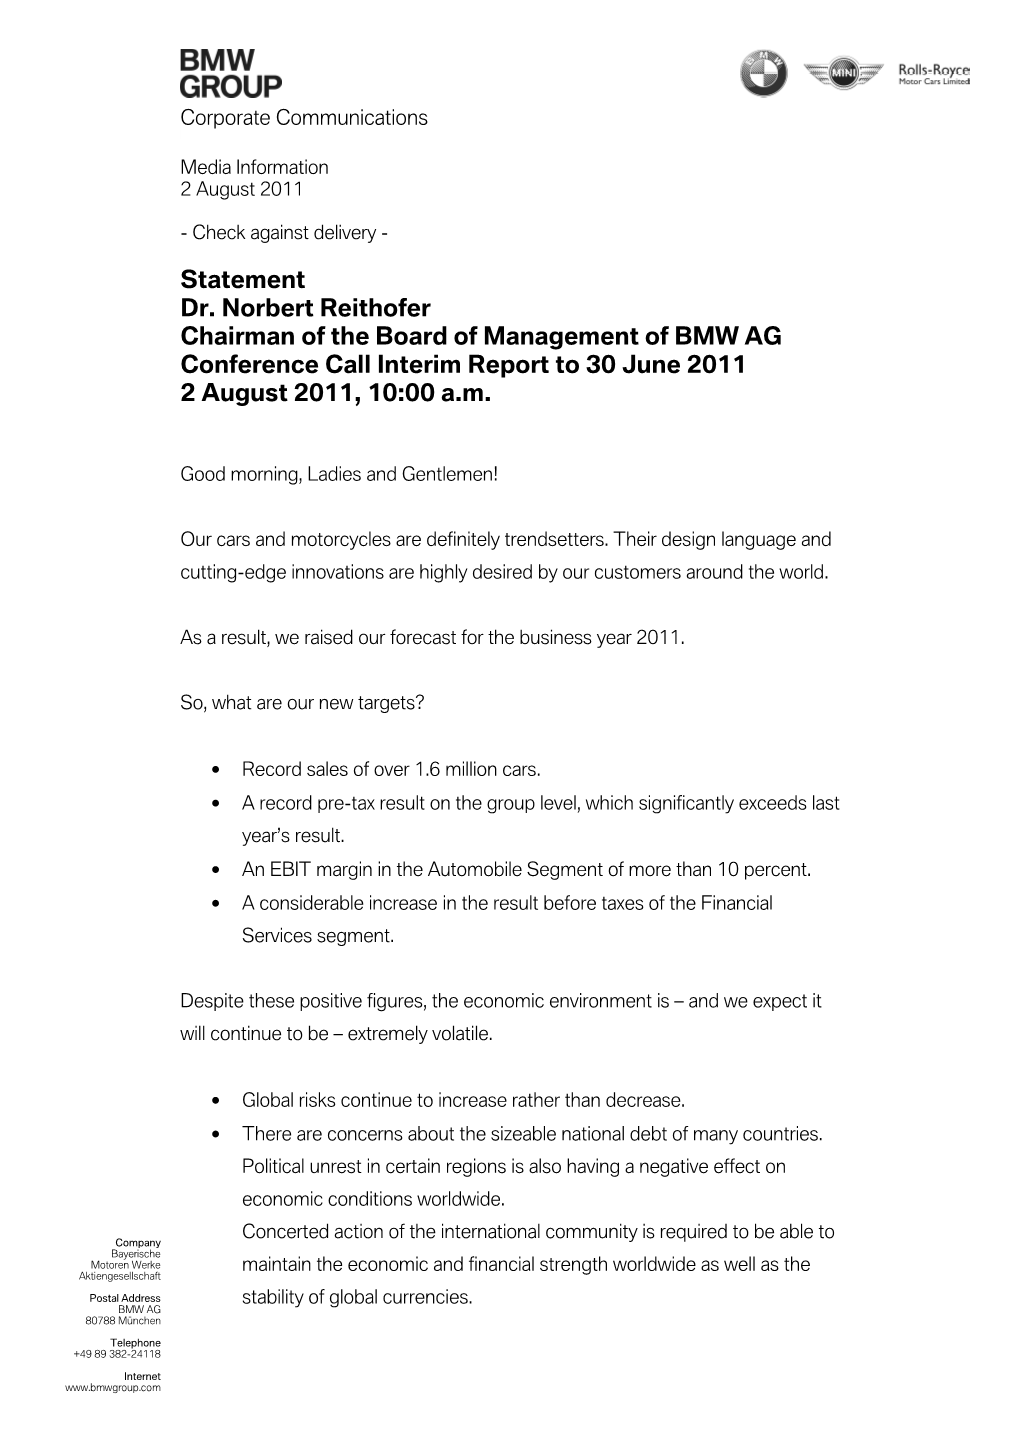 Statement by Dr. Norbert Reithofer, Chairman of the Board O F Management of BMW AG, Conference Call Interim Report to 30 June 2011